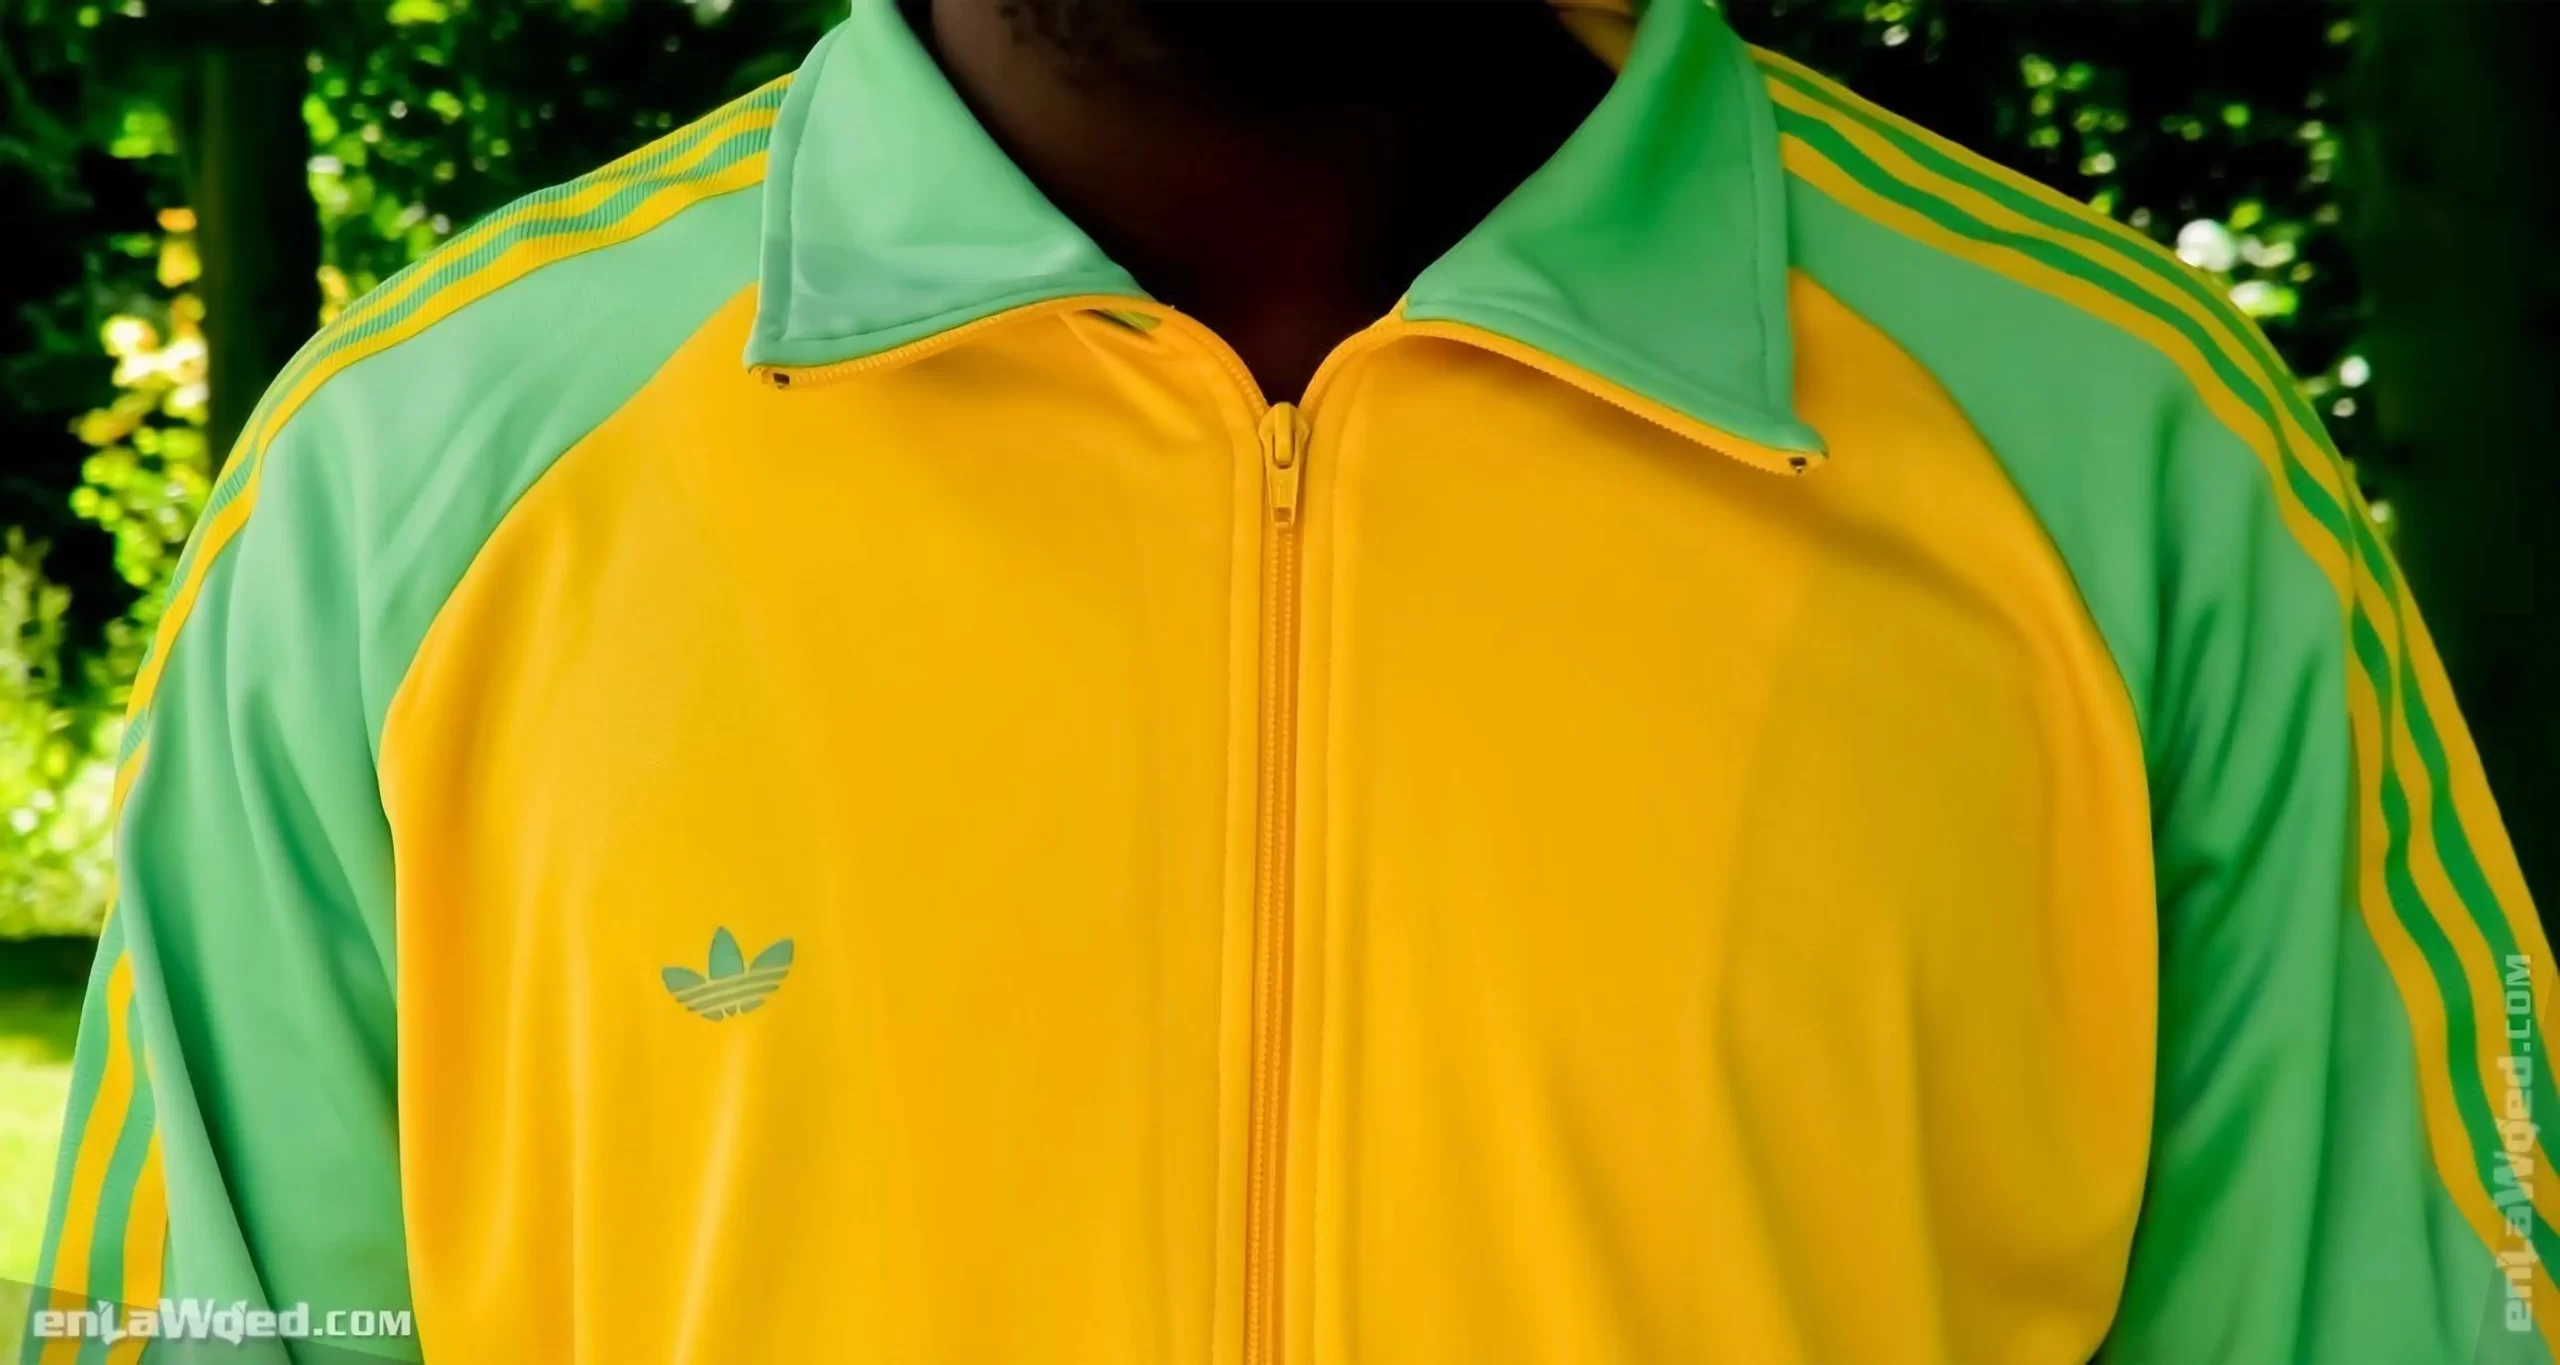 Men’s 2003 Zimbabwe Track Top by Adidas: Indulgence (EnLawded.com file #lmch09nb5cacqpazhuy)